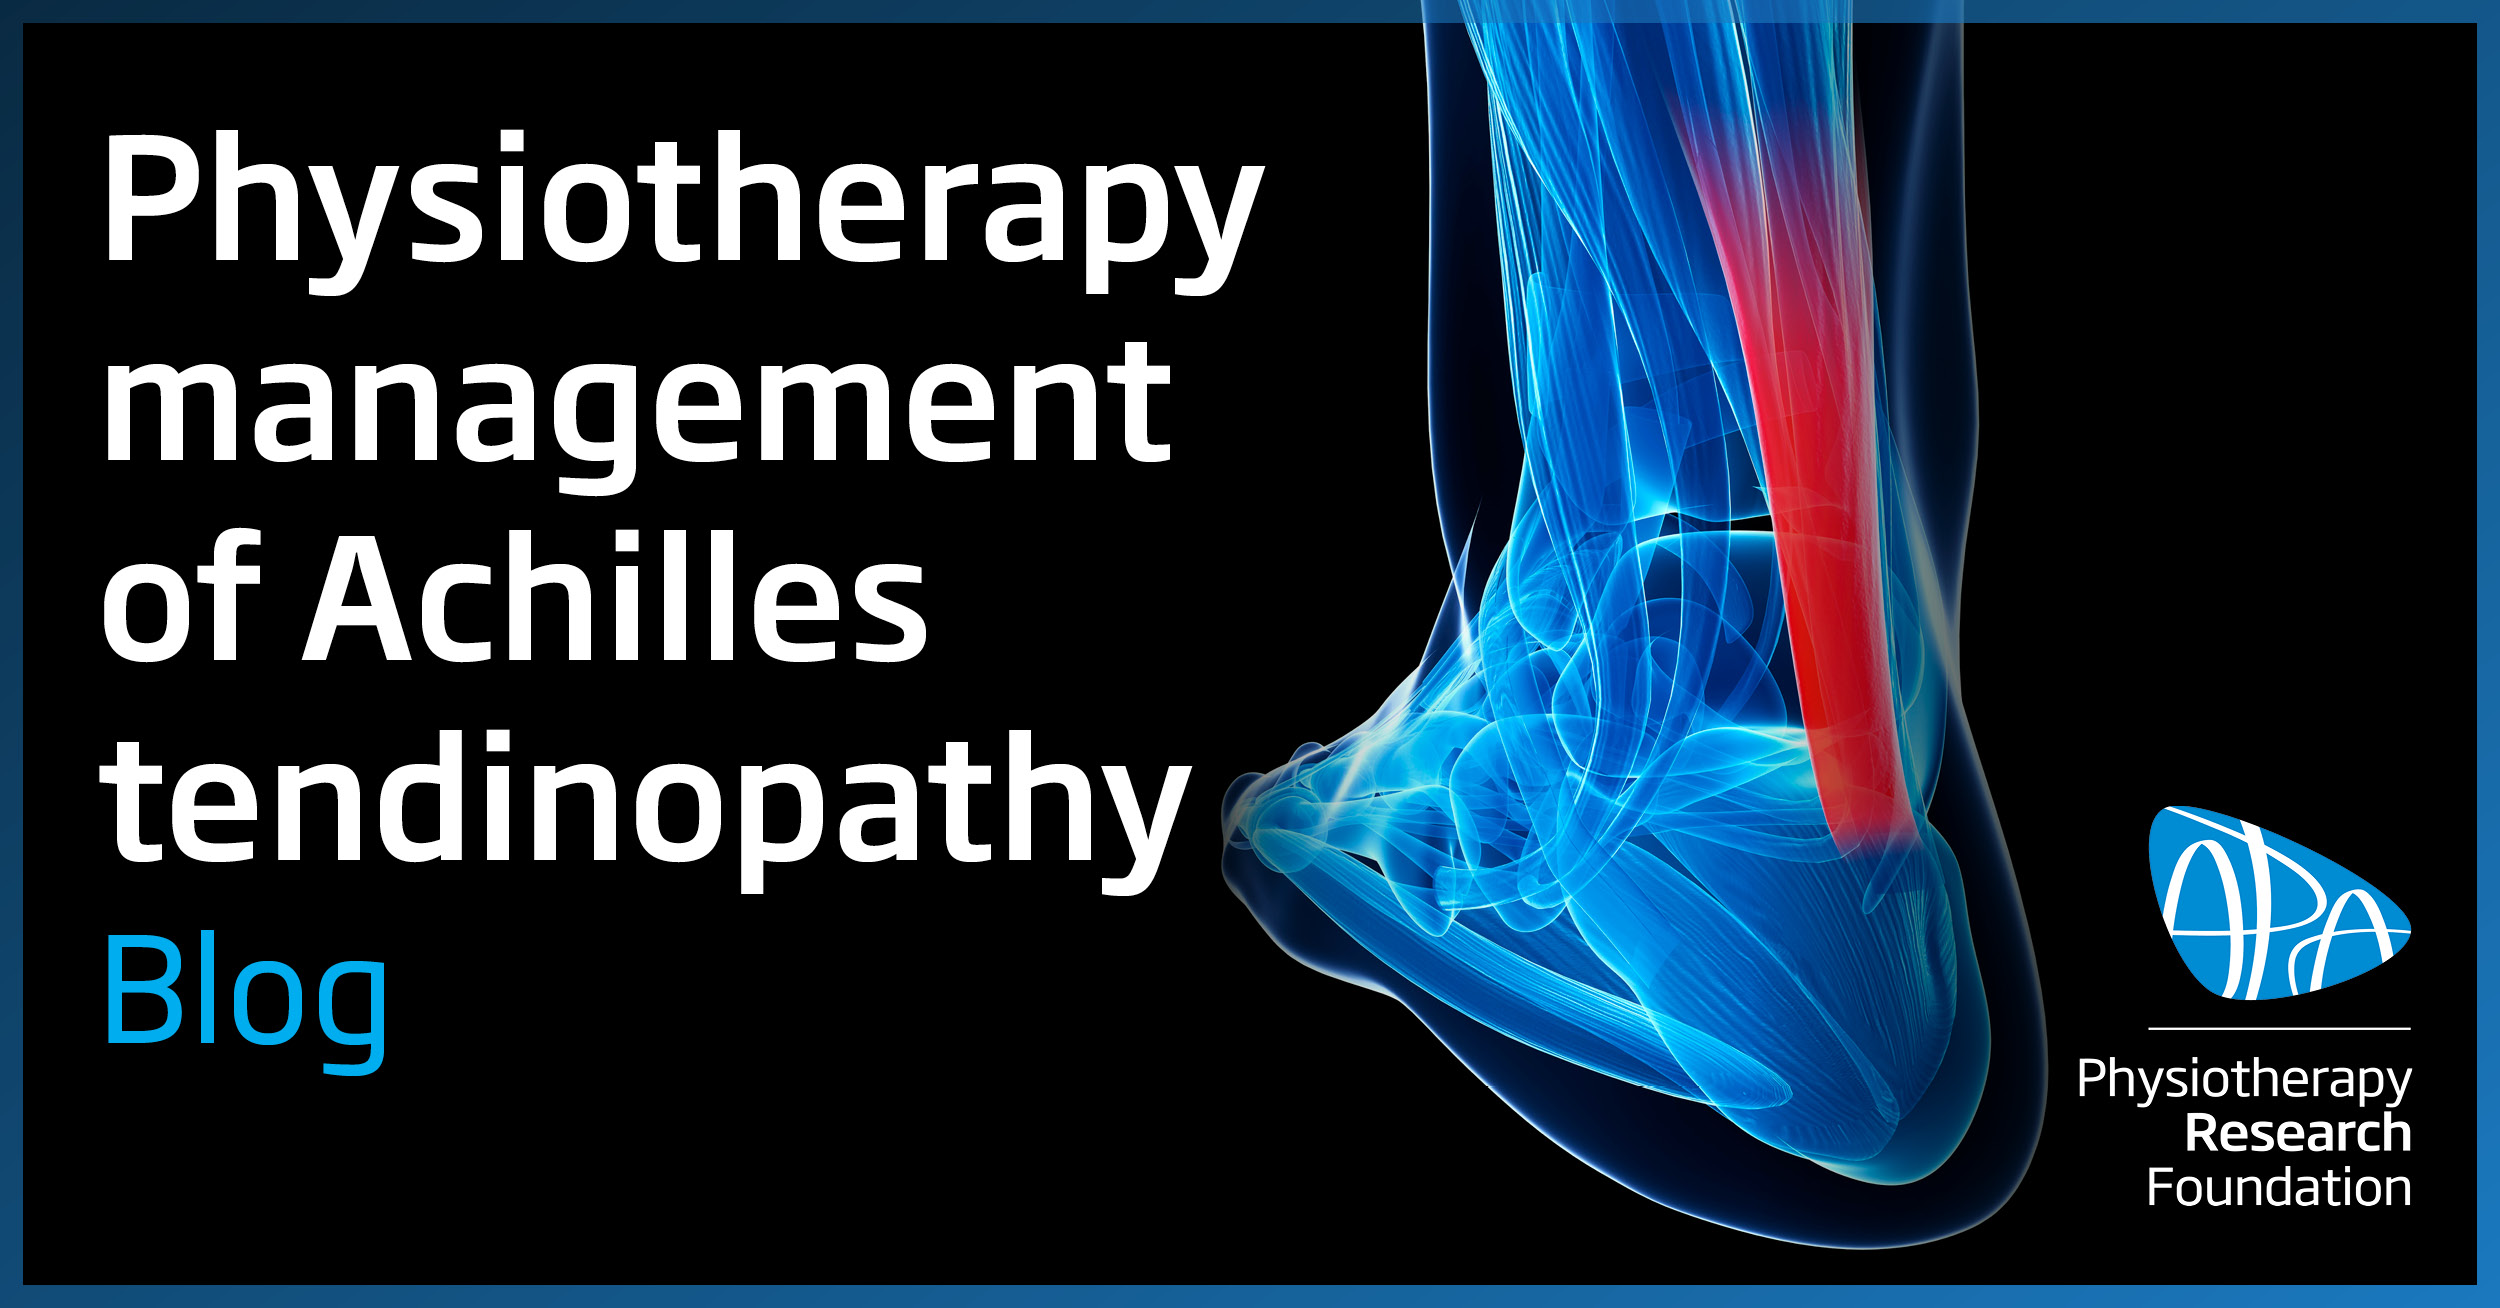 Physiotherapy management of Achilles tendinopathy